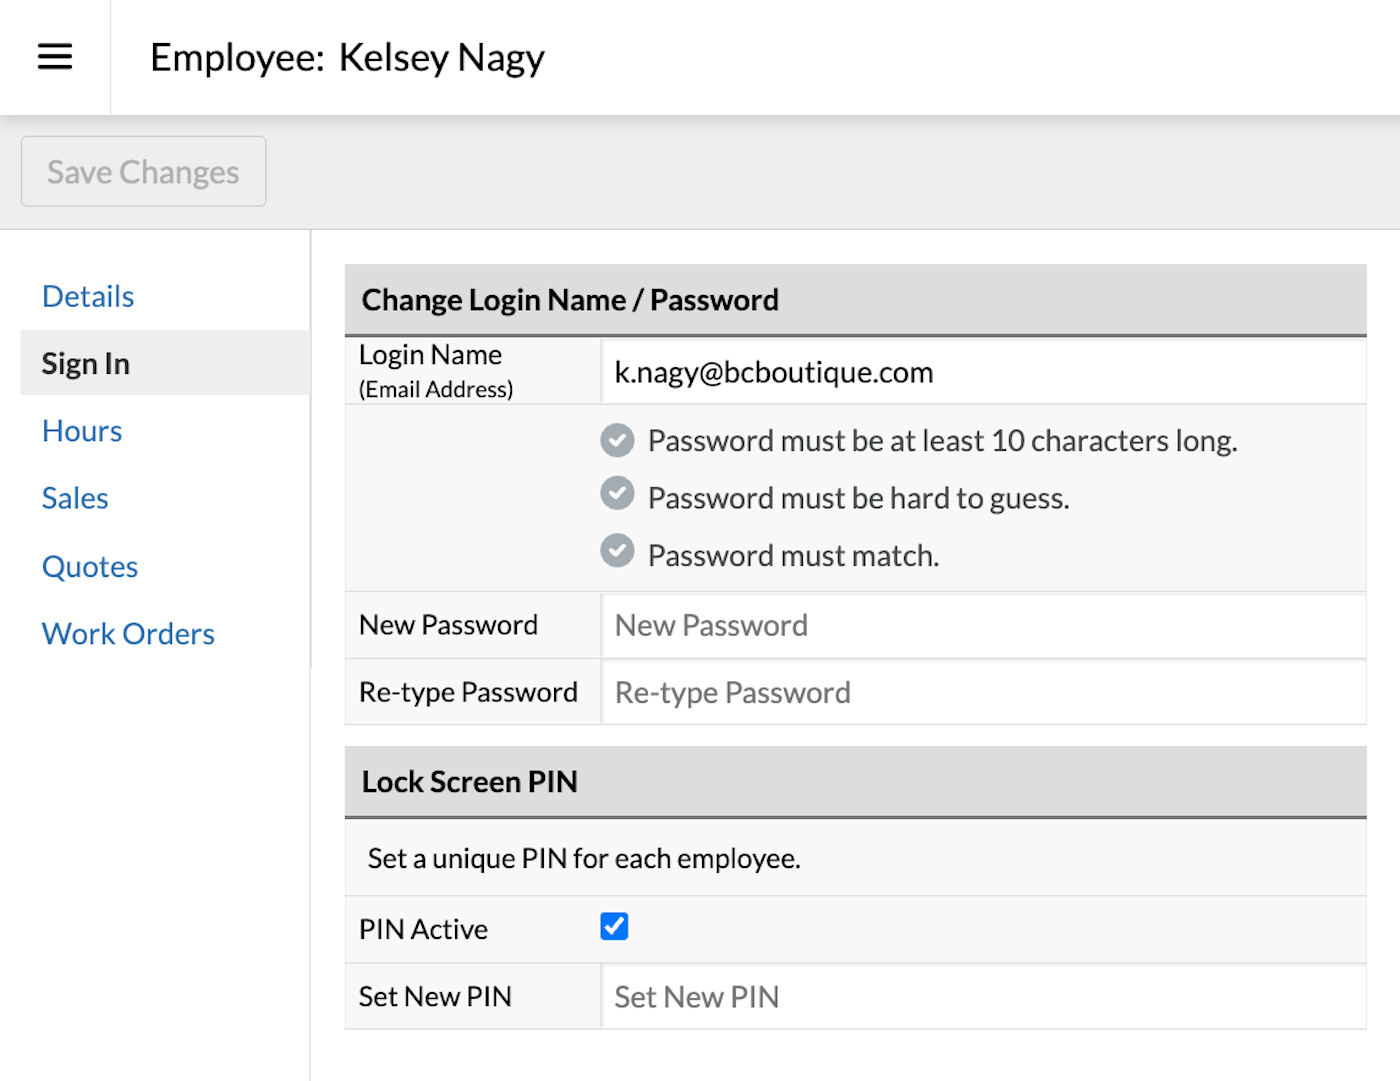 Employee page with fields to reset password and PIN.